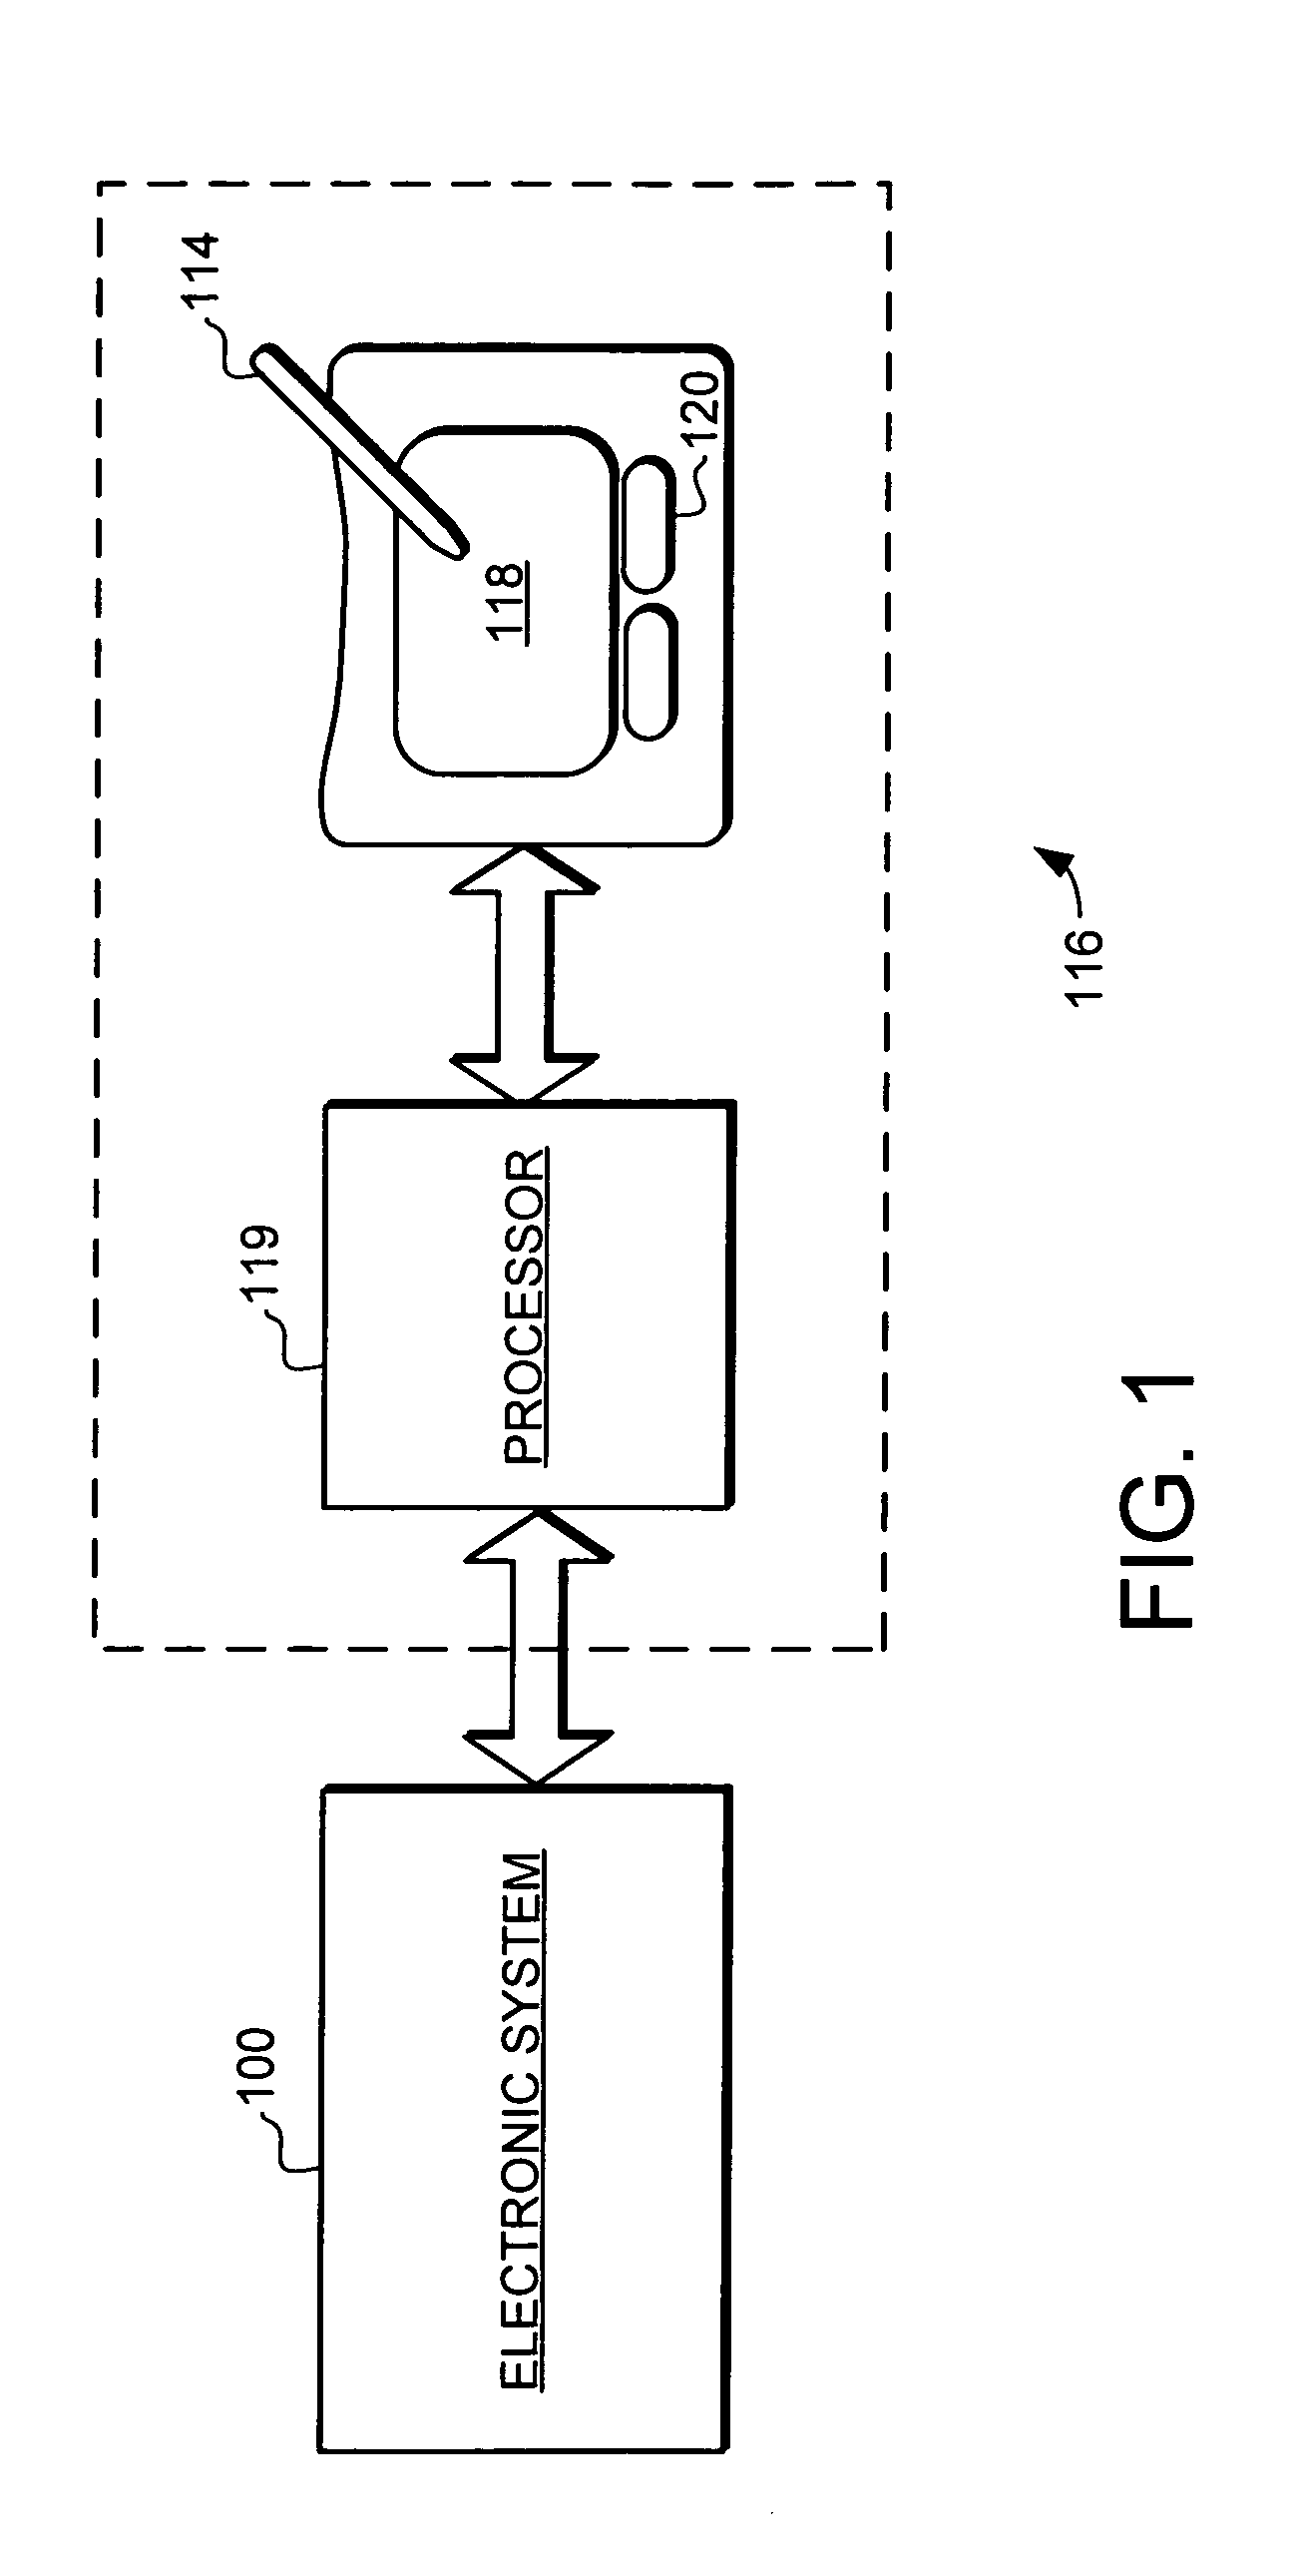 Proximity sensor device and method with improved indication of adjustment